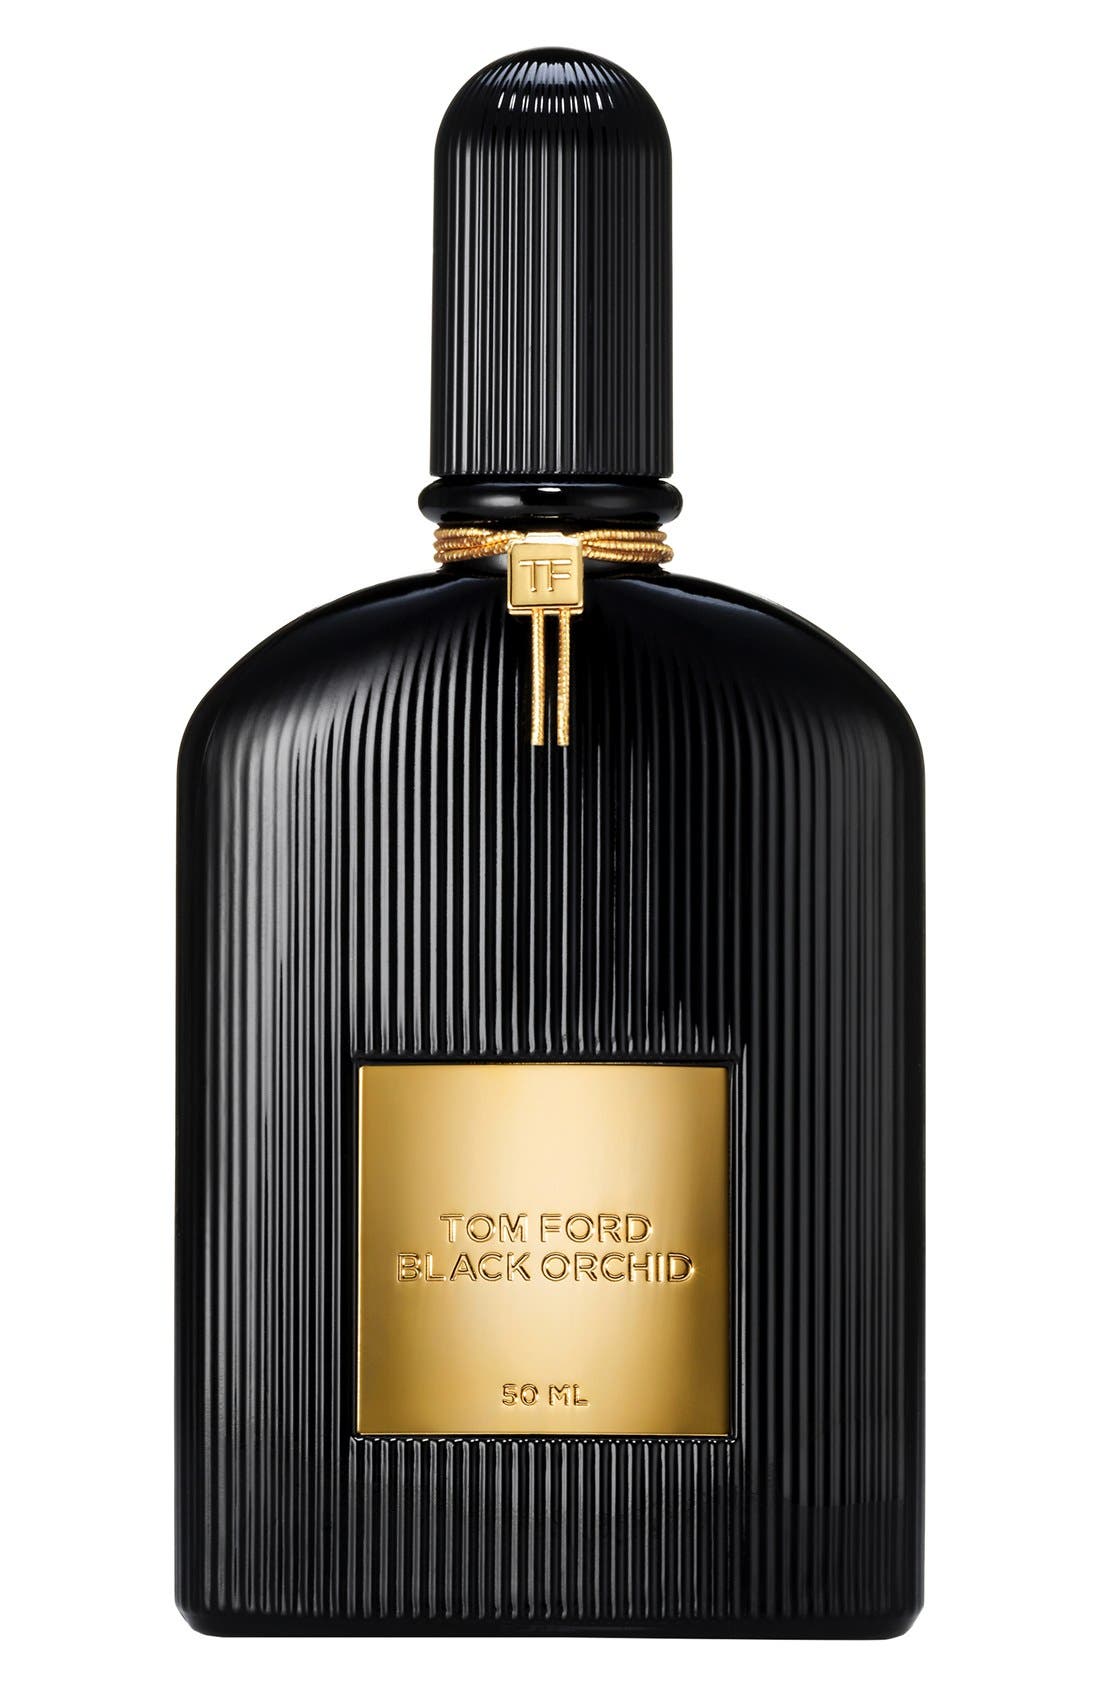 Black Orchid Parfum Tom Ford perfume - a fragrance for women and men 2020